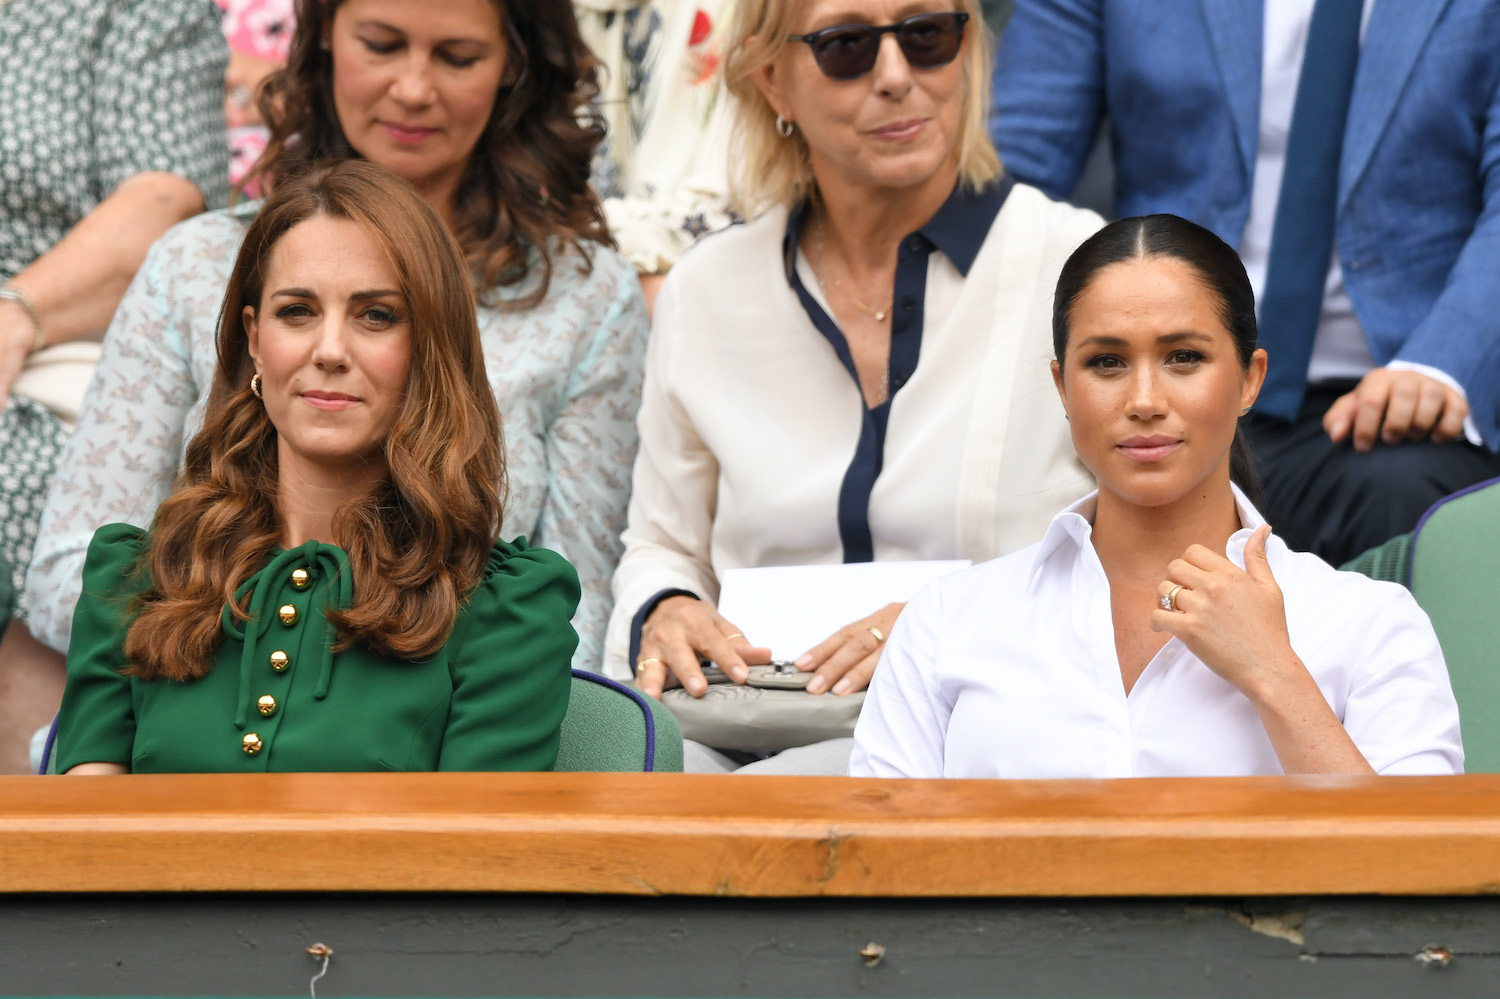 Kate Middleton and Meghan Markle sit together at Wimbledon in 2019 with Kate wearing a green dress and Meghan wearing a white top.